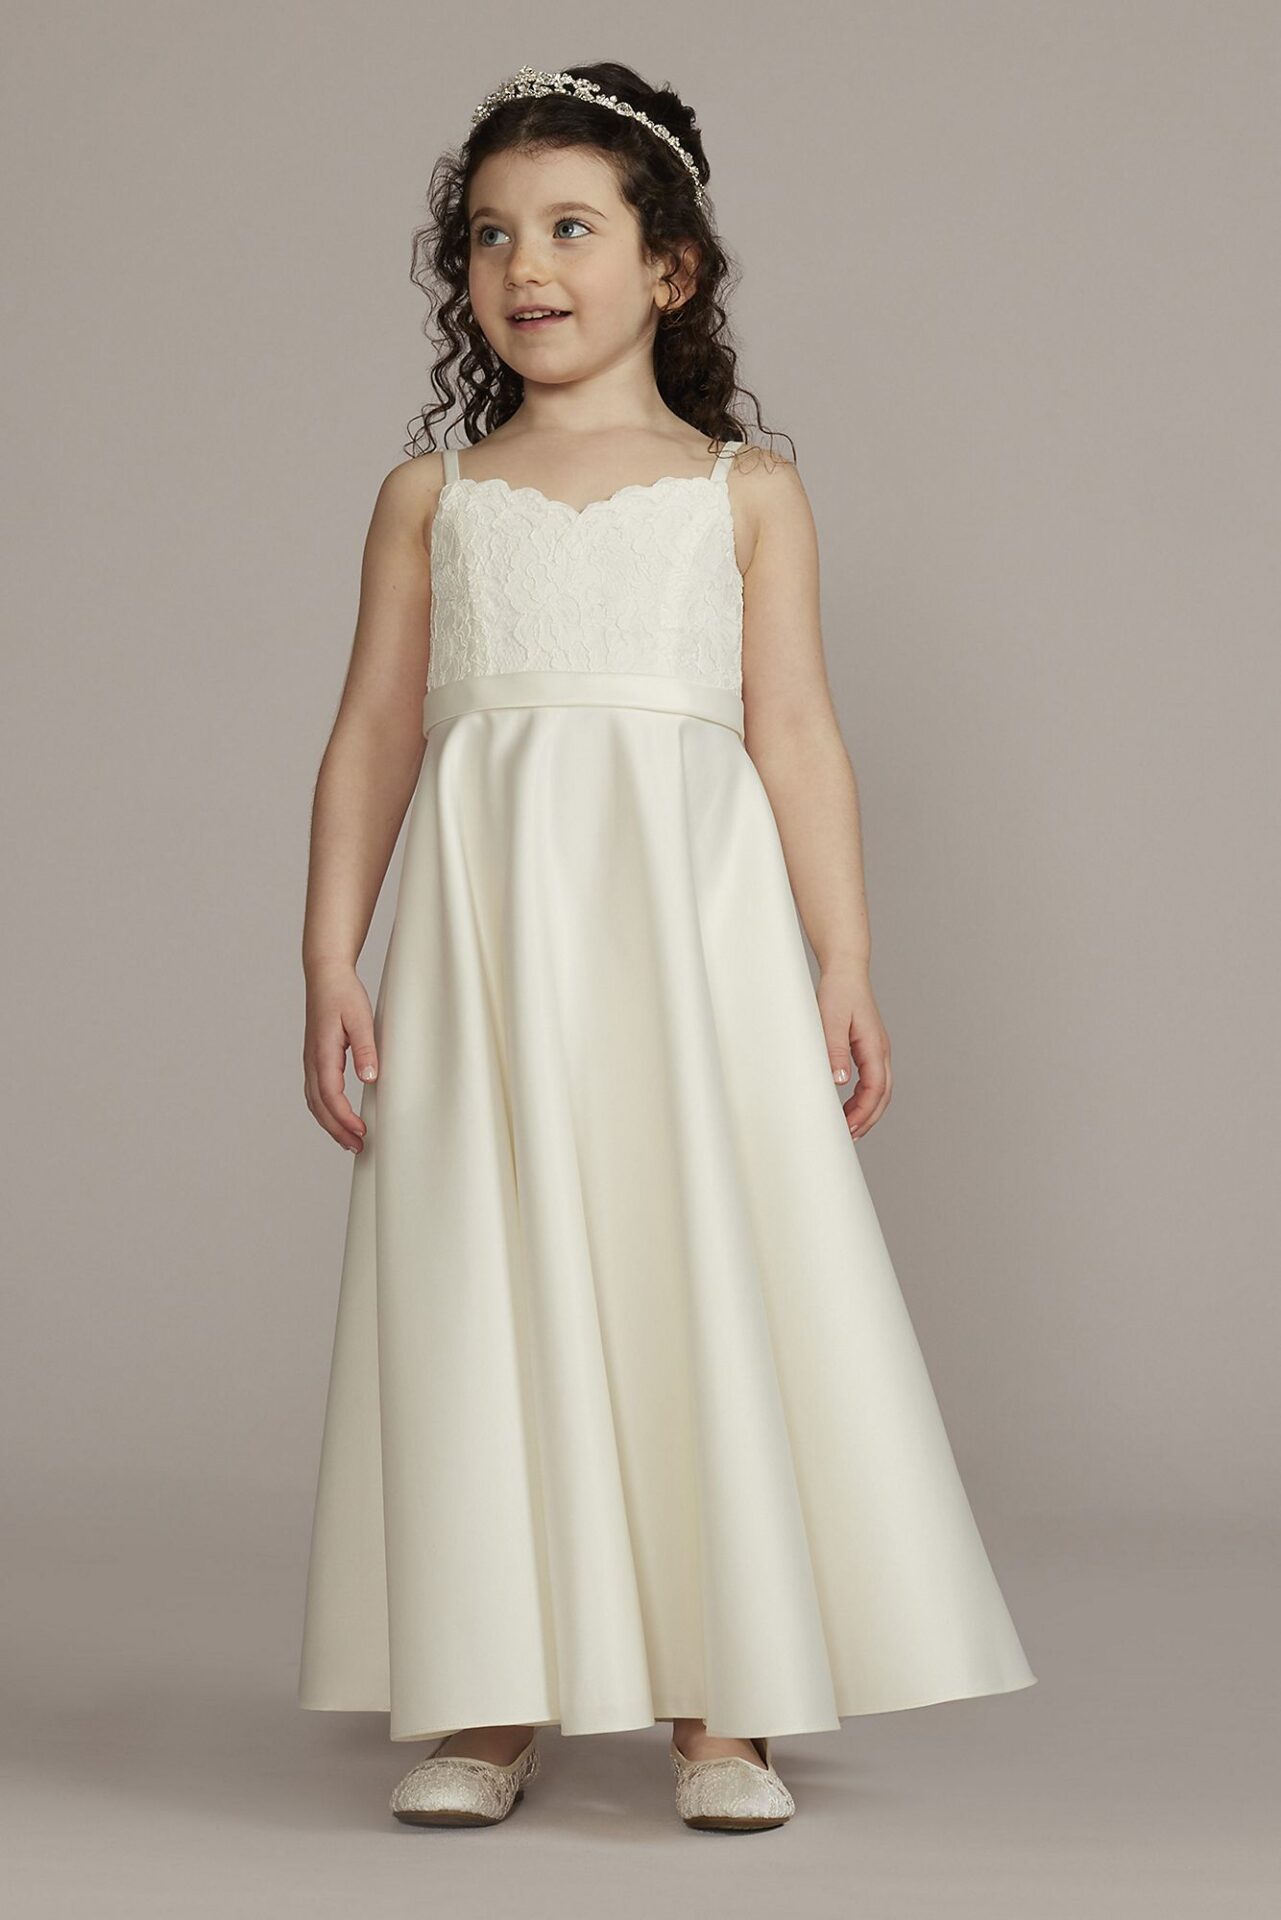 Lace and Satin Spaghetti Strap Flower Girl Dress WG1465